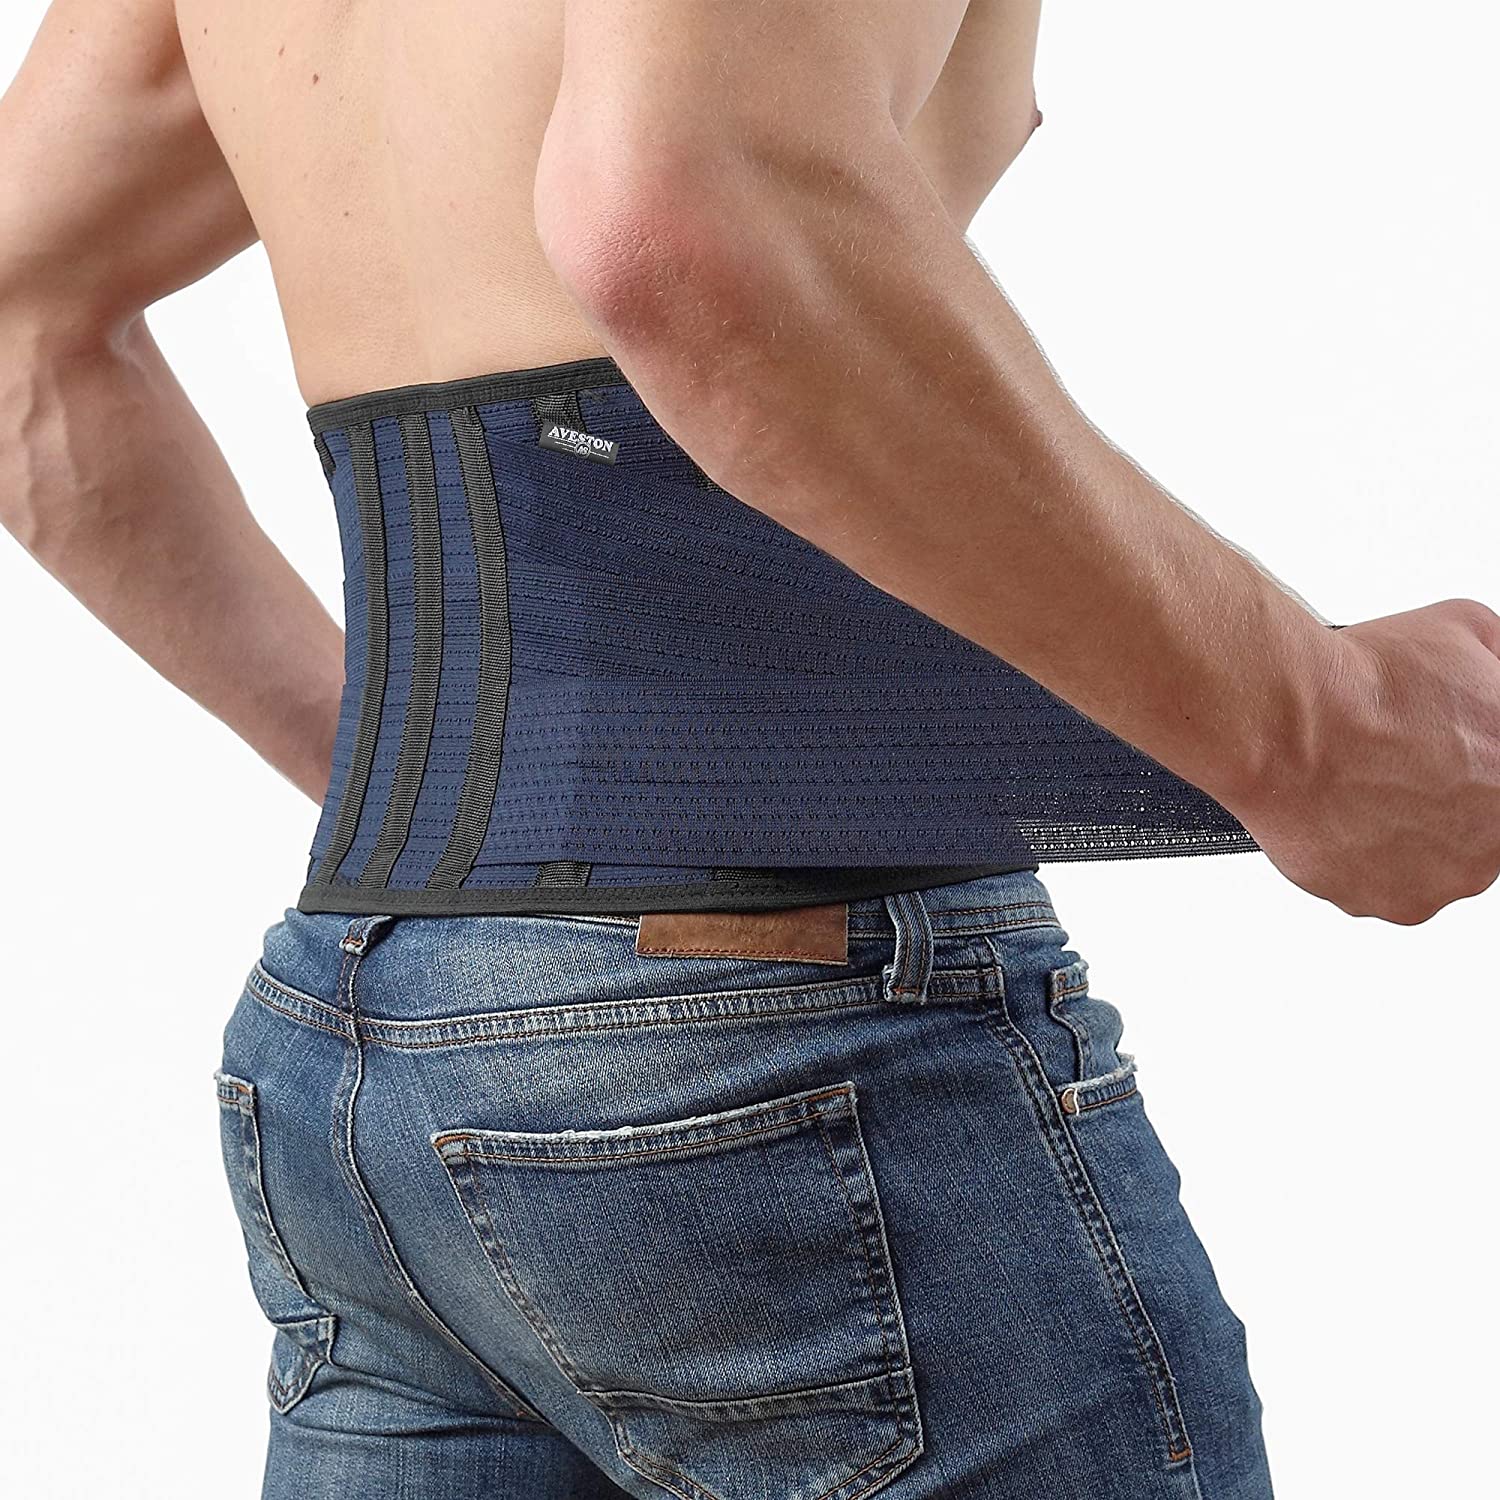 Back Support Lower Back Brace provides Back Pain Relief